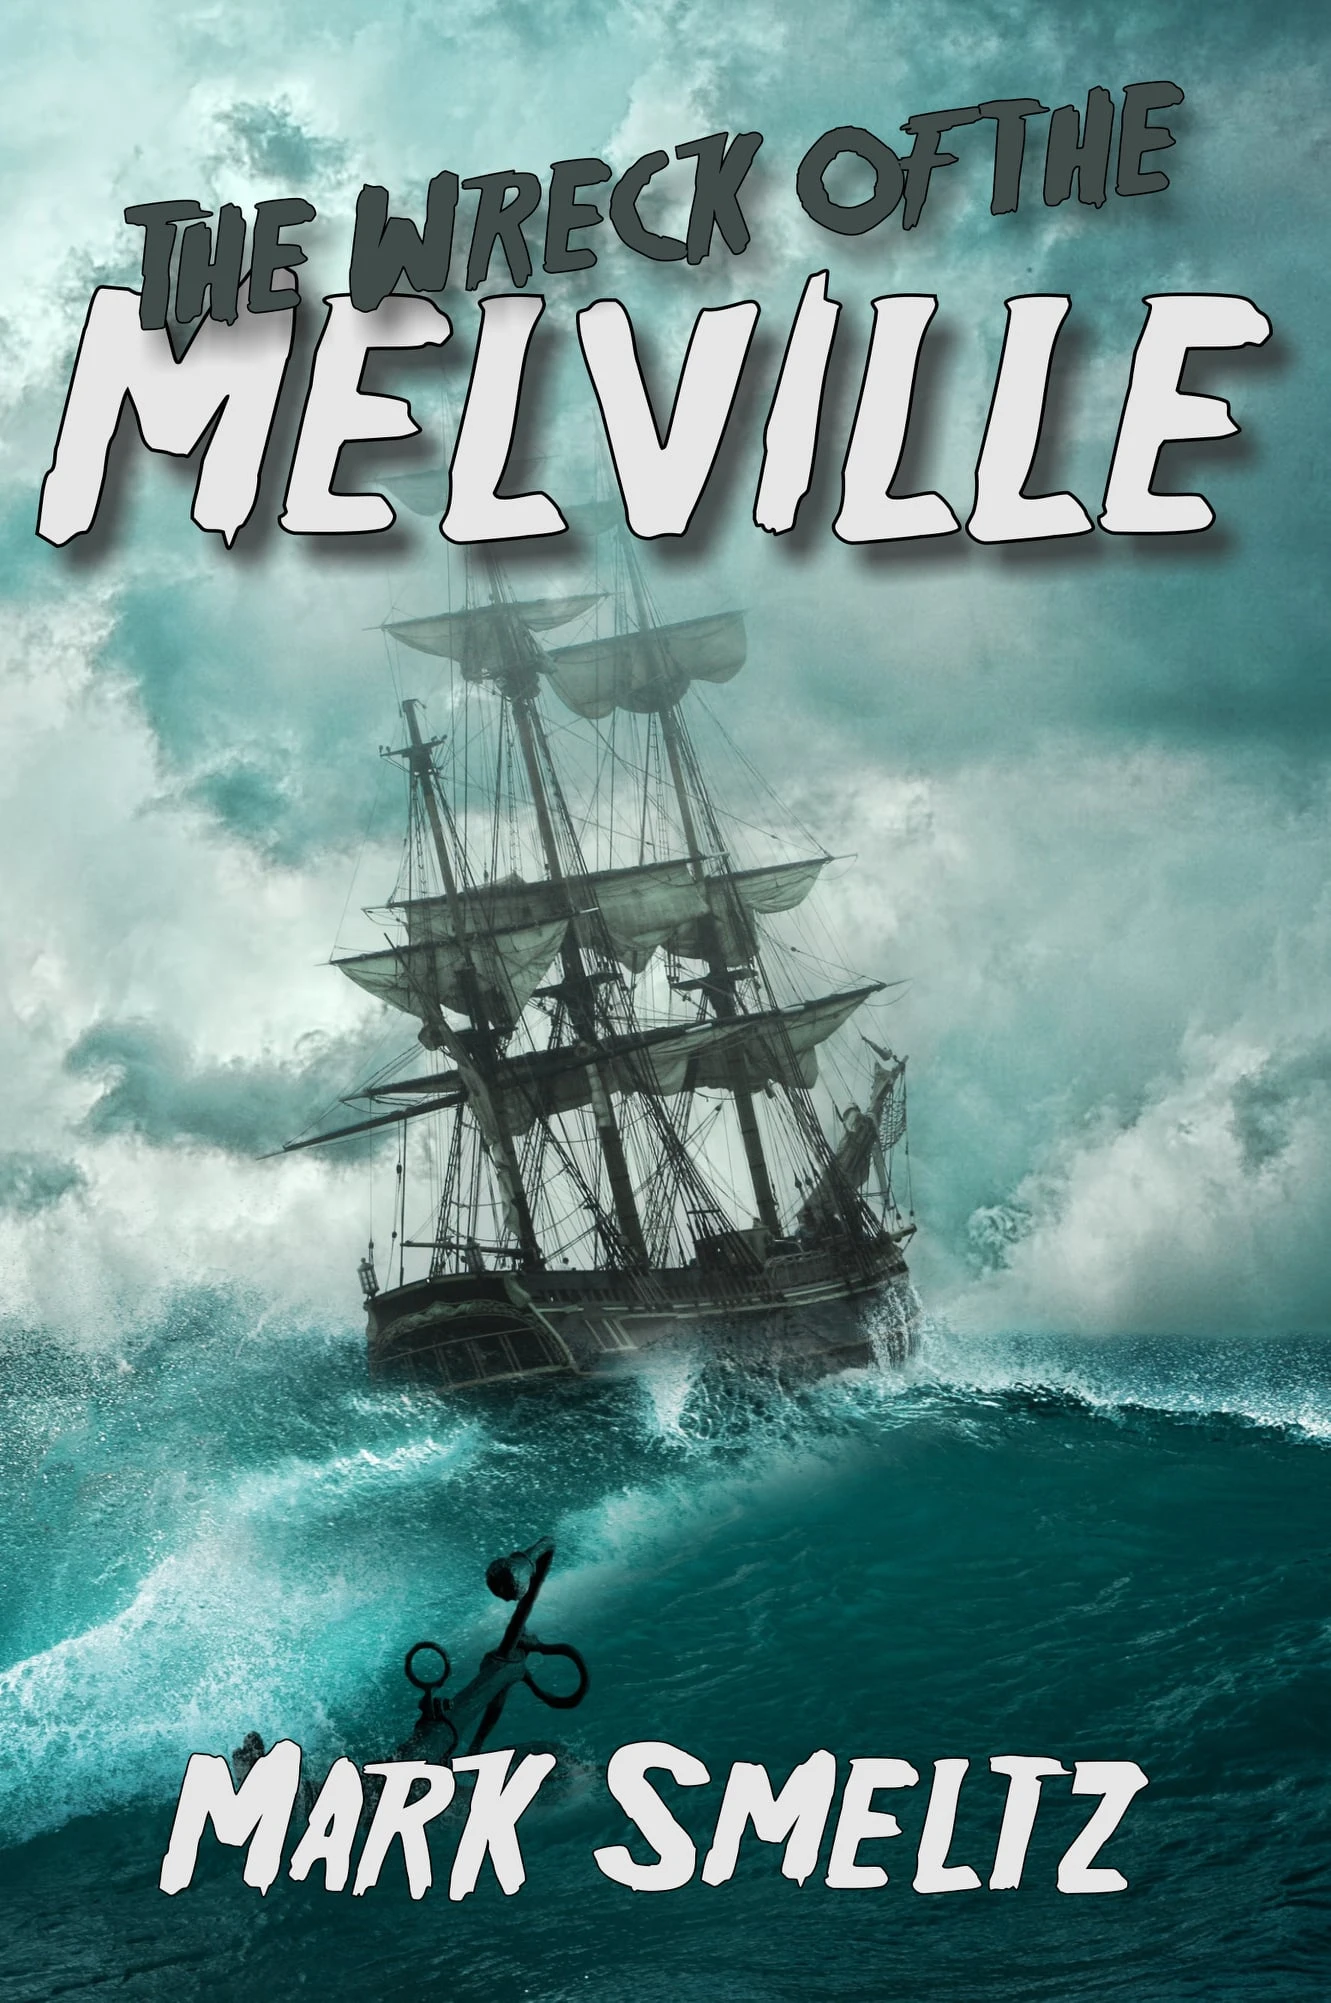 The Wreck of the Melville